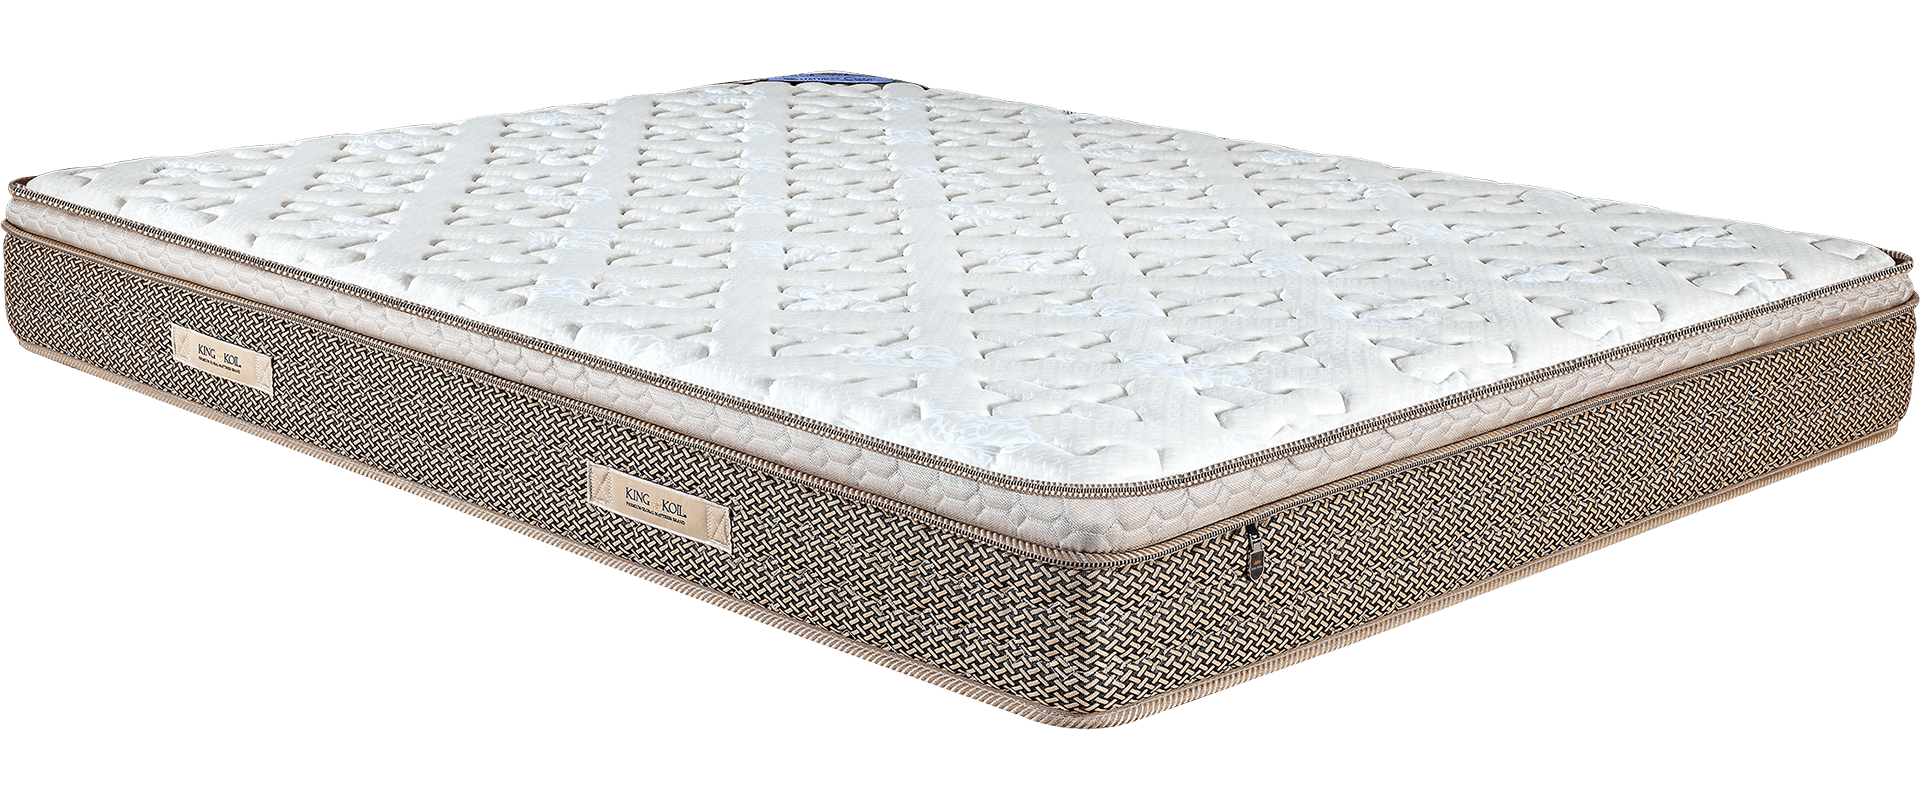 dr ortho mattress price in india